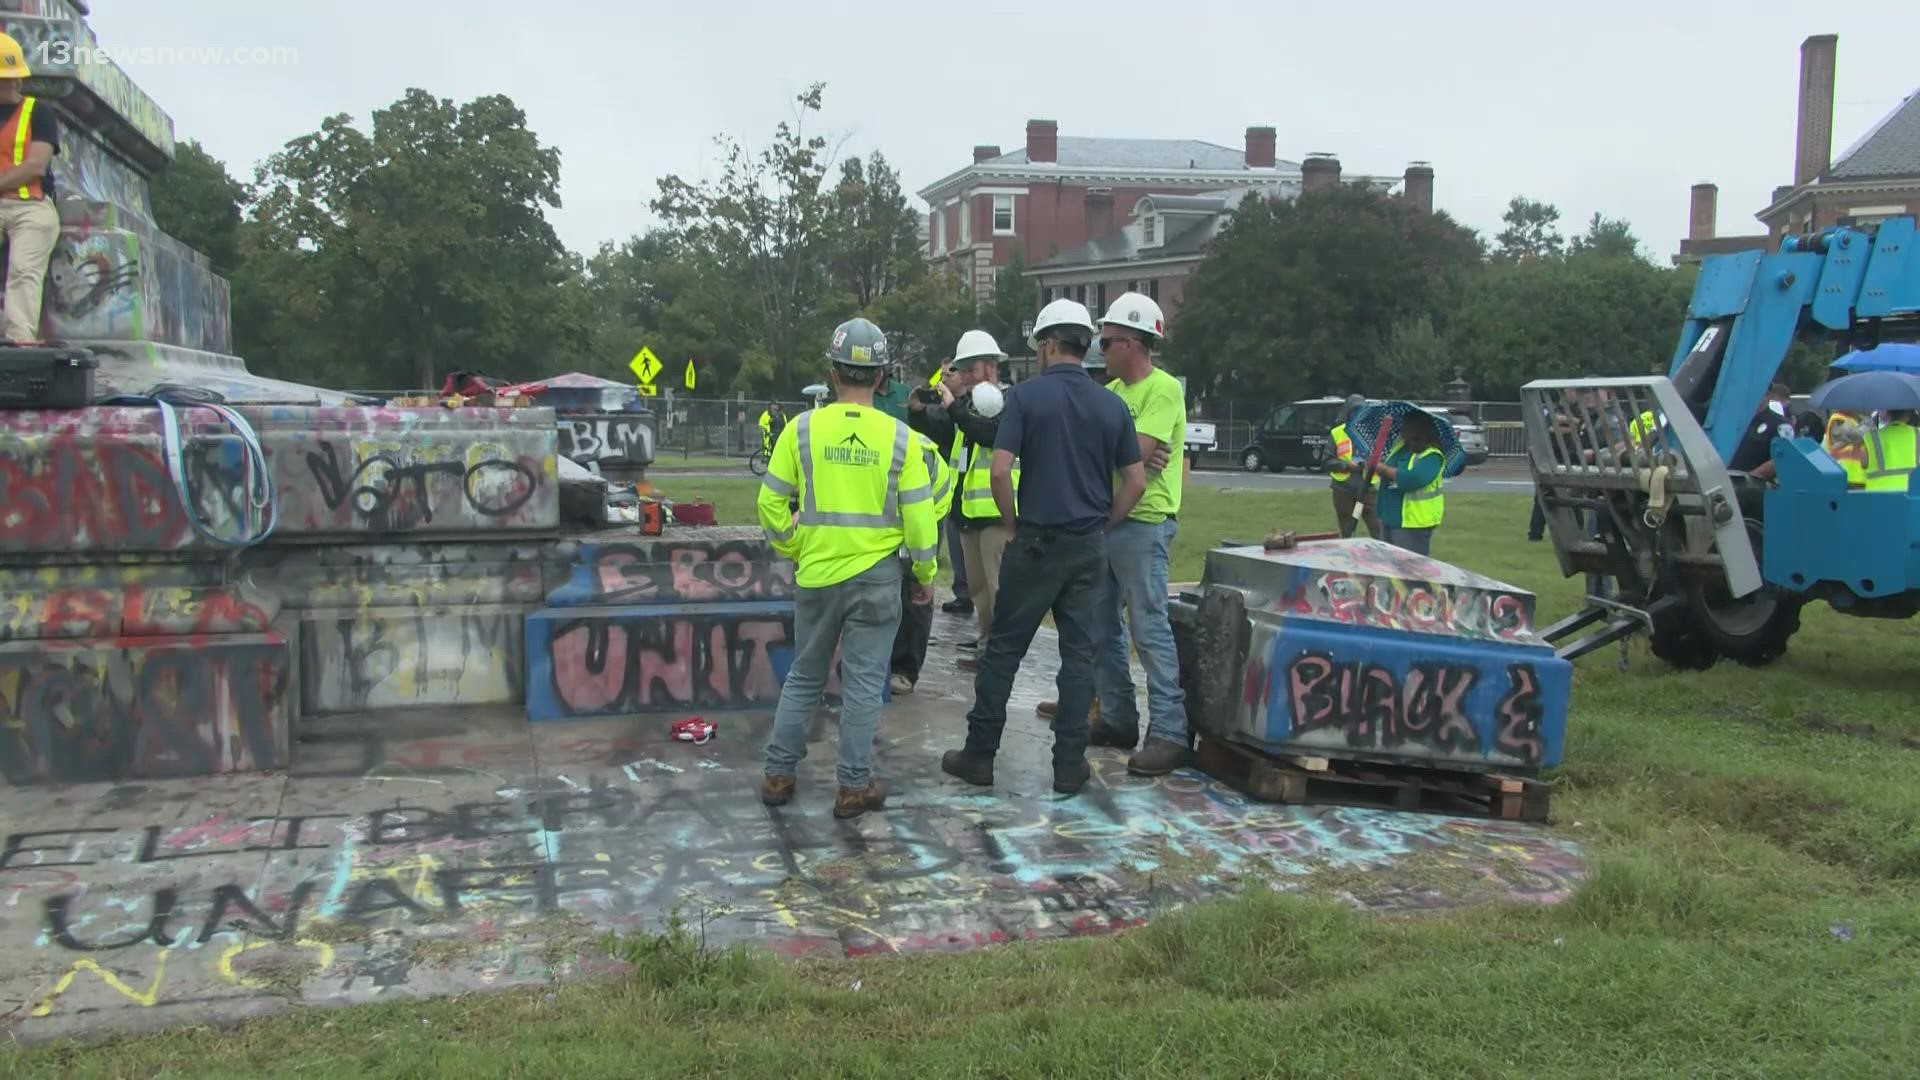 A day after crews removed a statue of Gen. Robert E. Lee from its pedestal in the middle of Monument Avenue, they were trying to locate a time capsule in the base.